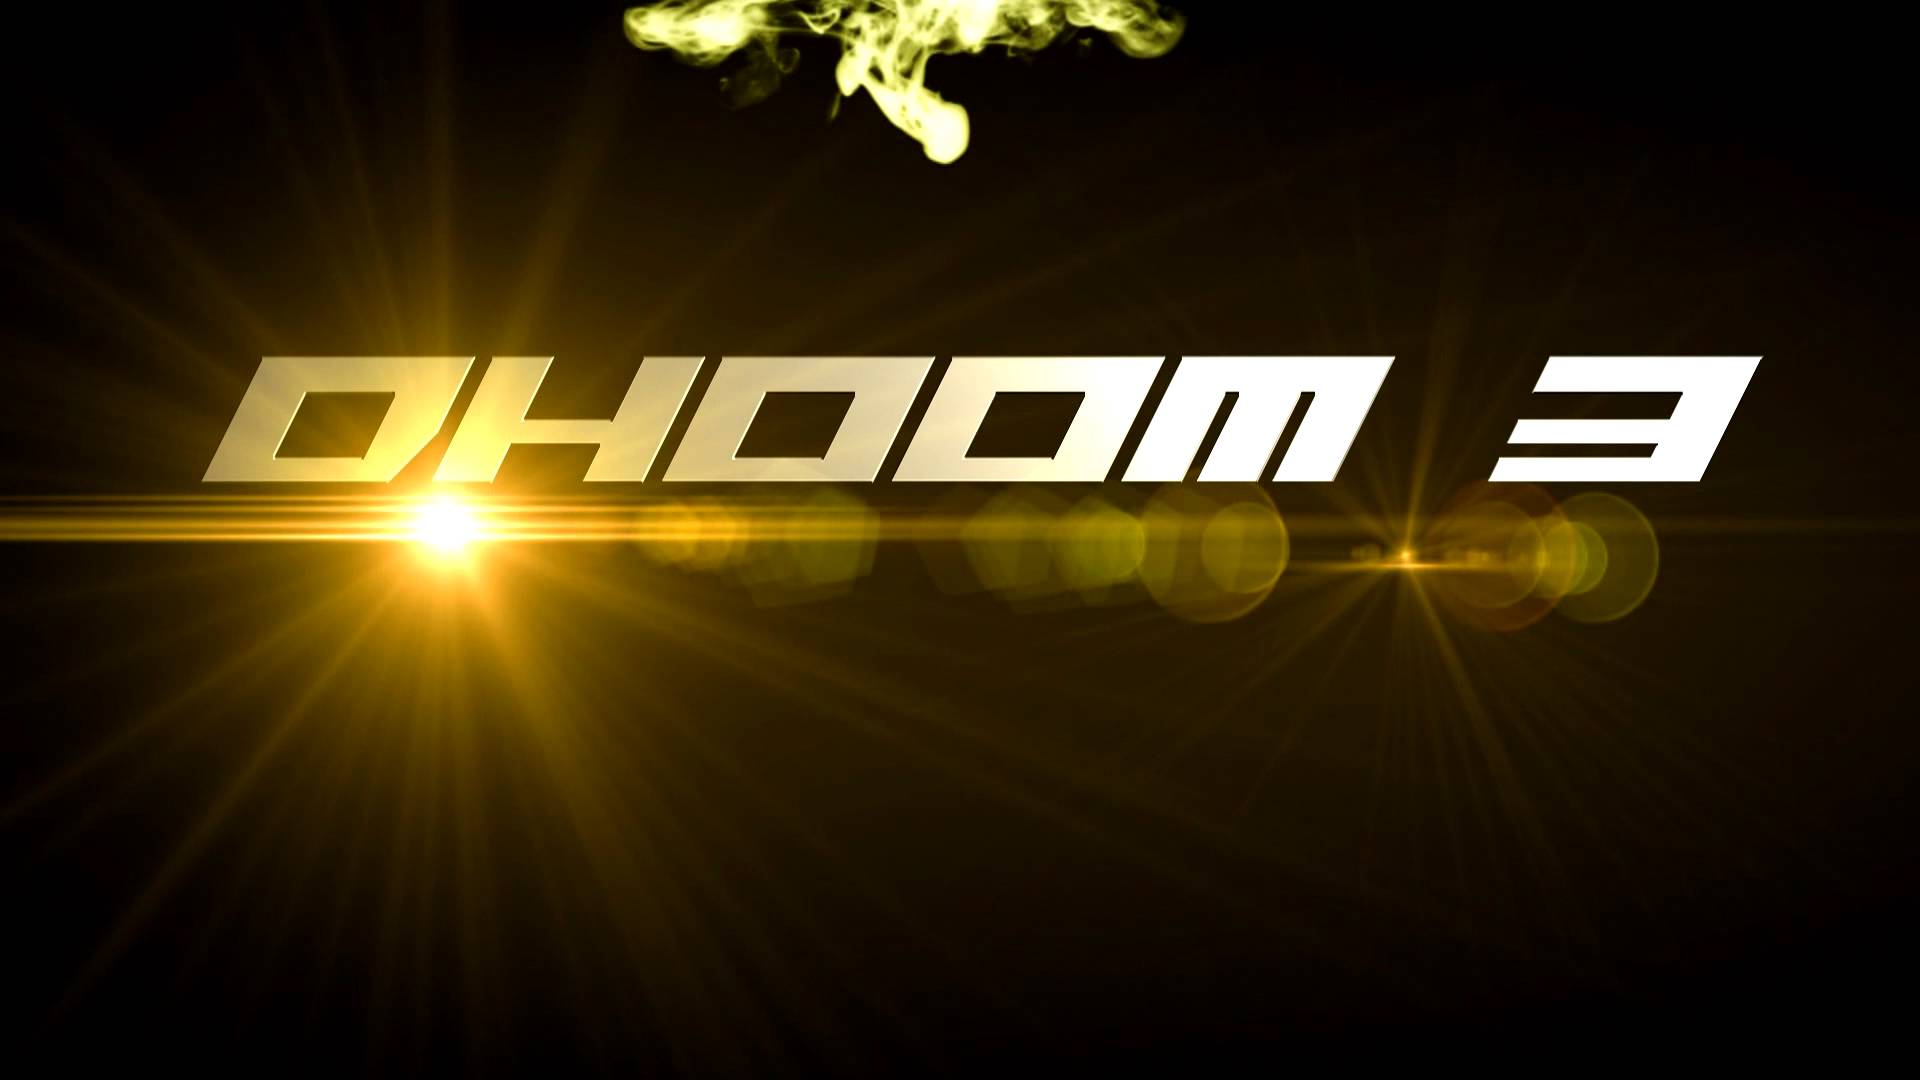 Dhoom 3 Bollywood movie wallpaper